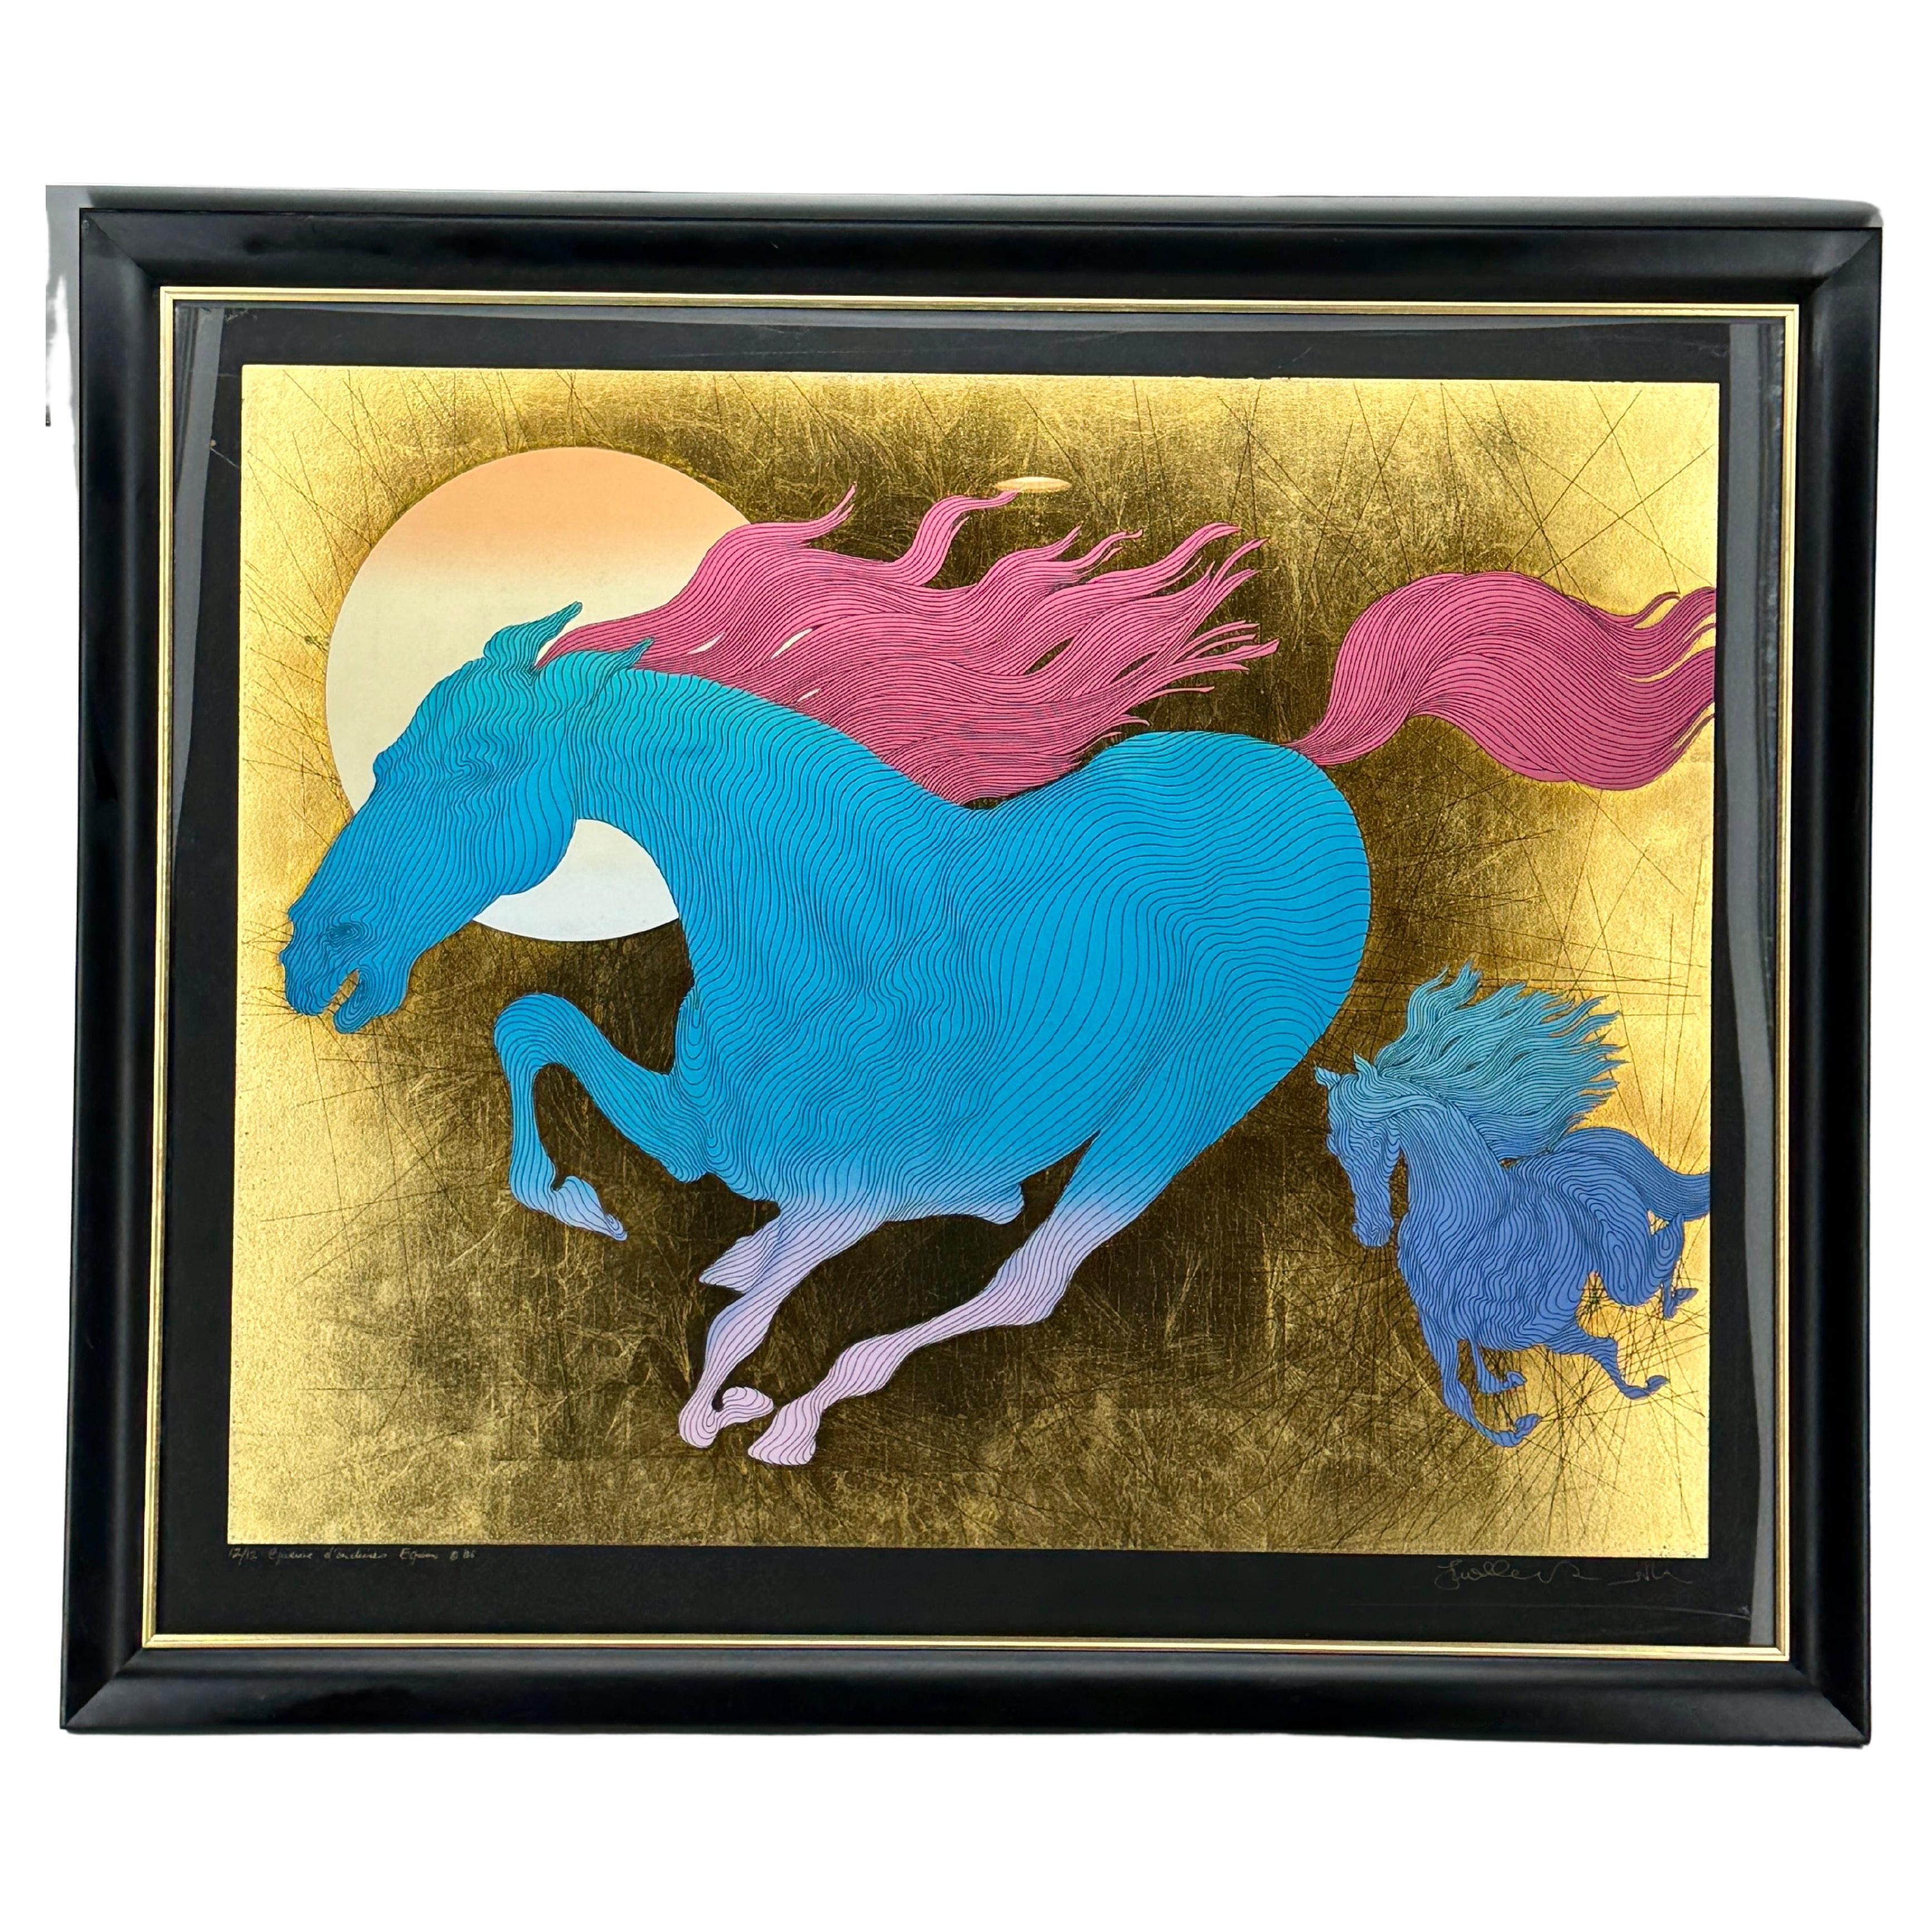 Guillaume Azoulay Equus Gold Leaf Running Horse Serigraph Limited Edition 12/12 In Good Condition For Sale In Haddonfield, NJ